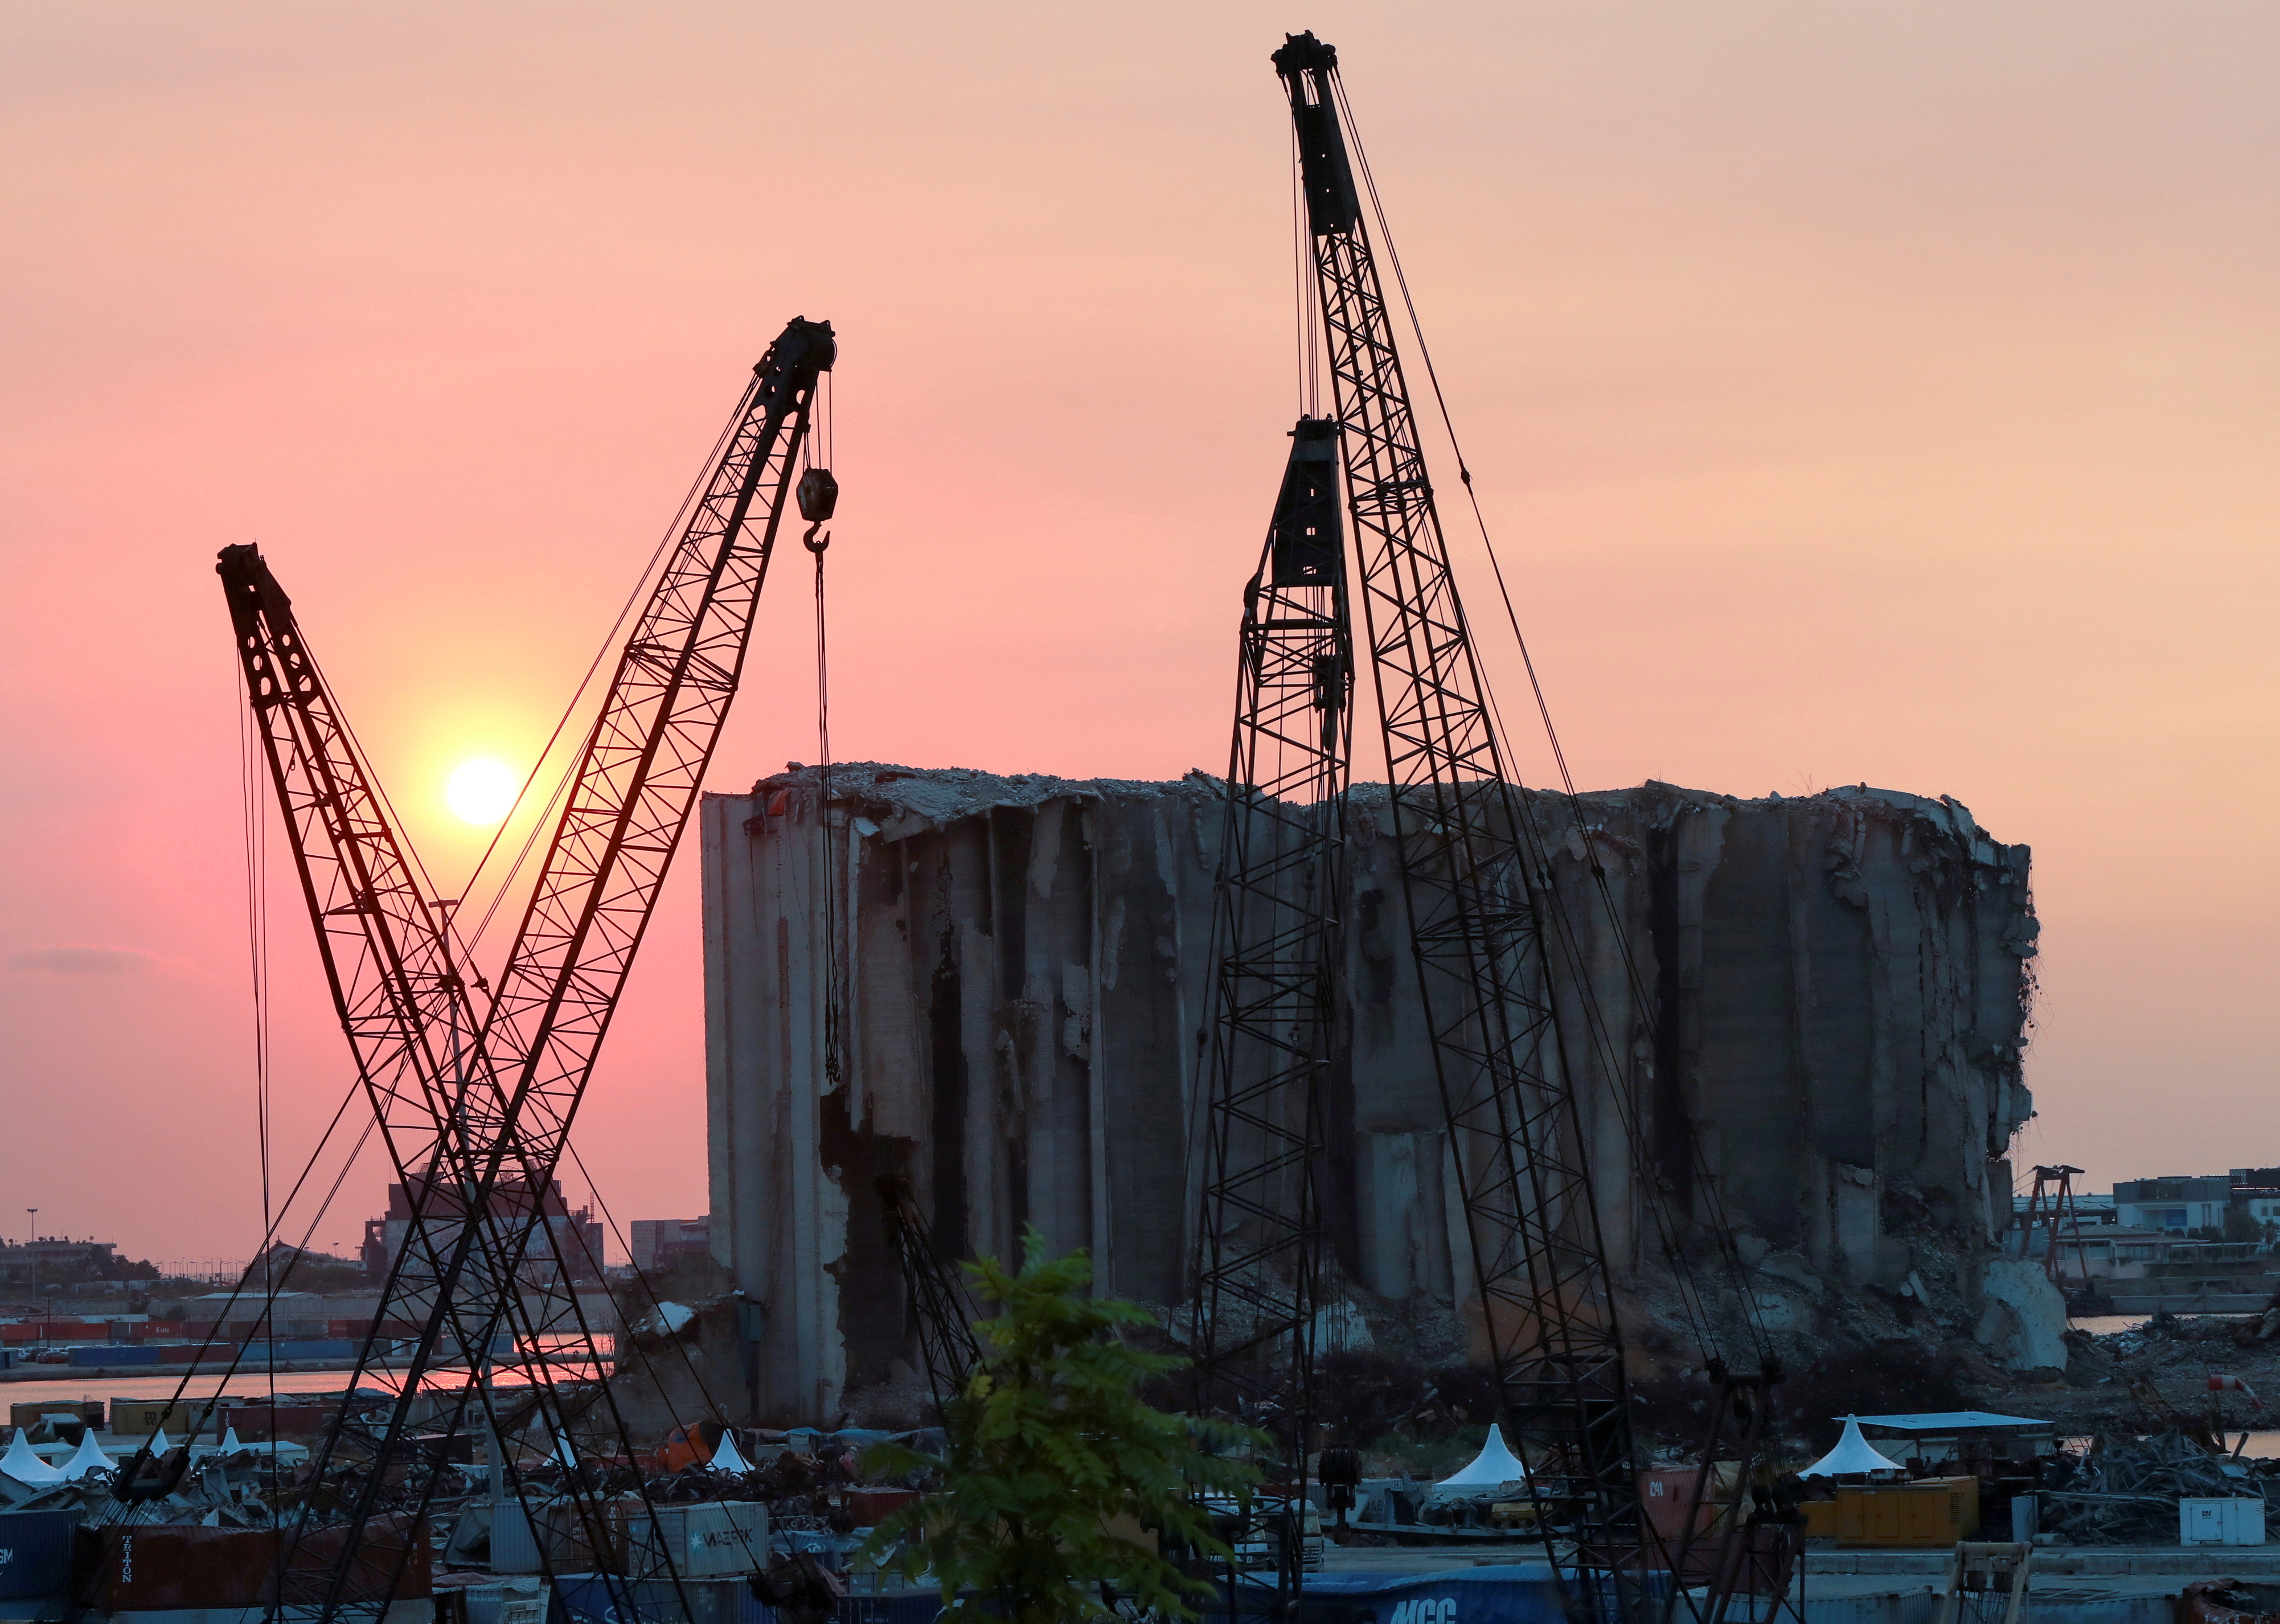 A view shows the grain silo that was damaged during last year's Beirut port blast, during sunset in Beirut